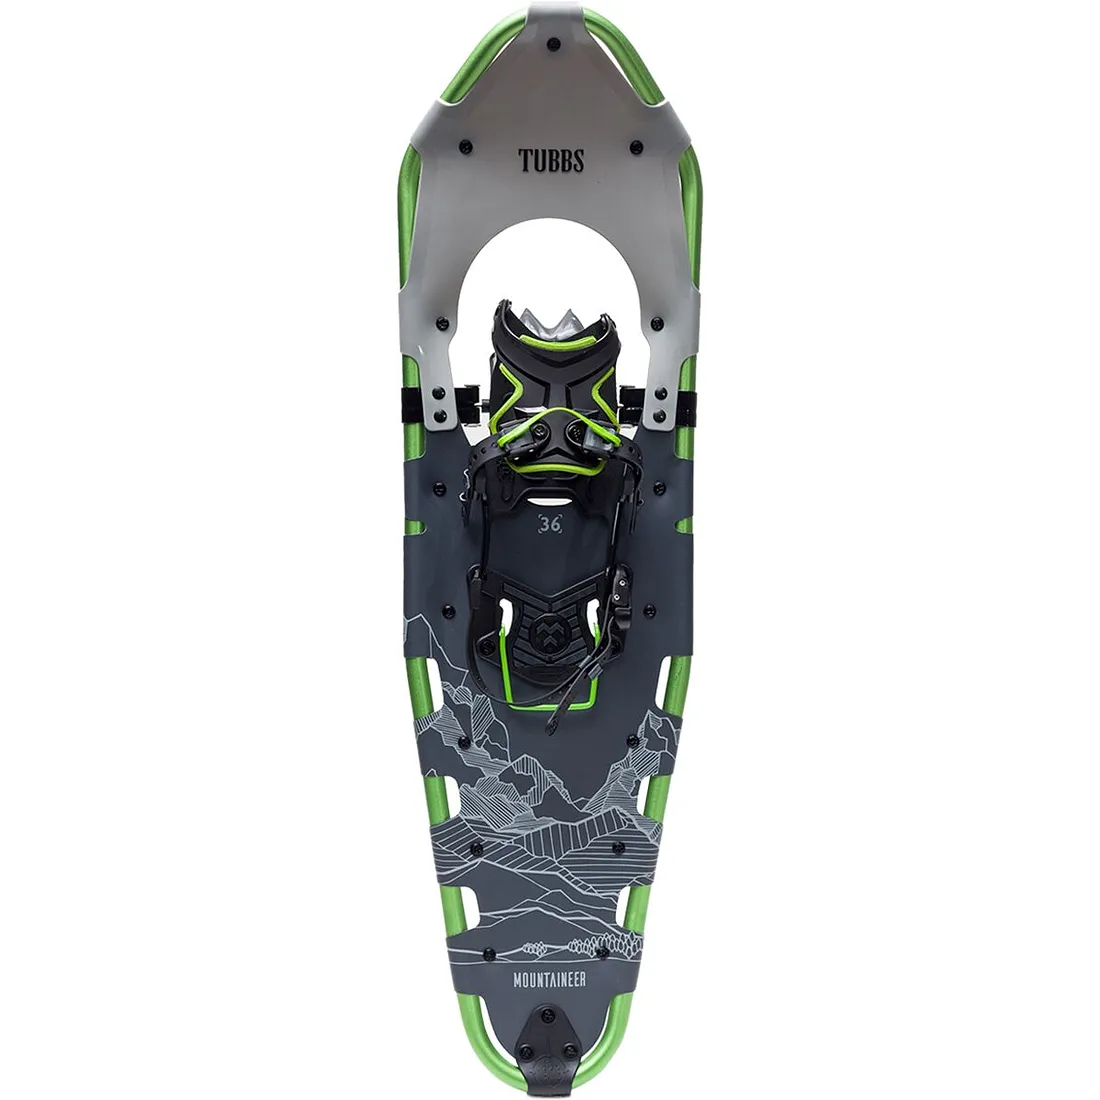 Tubbs Mountaineer Snowshoes